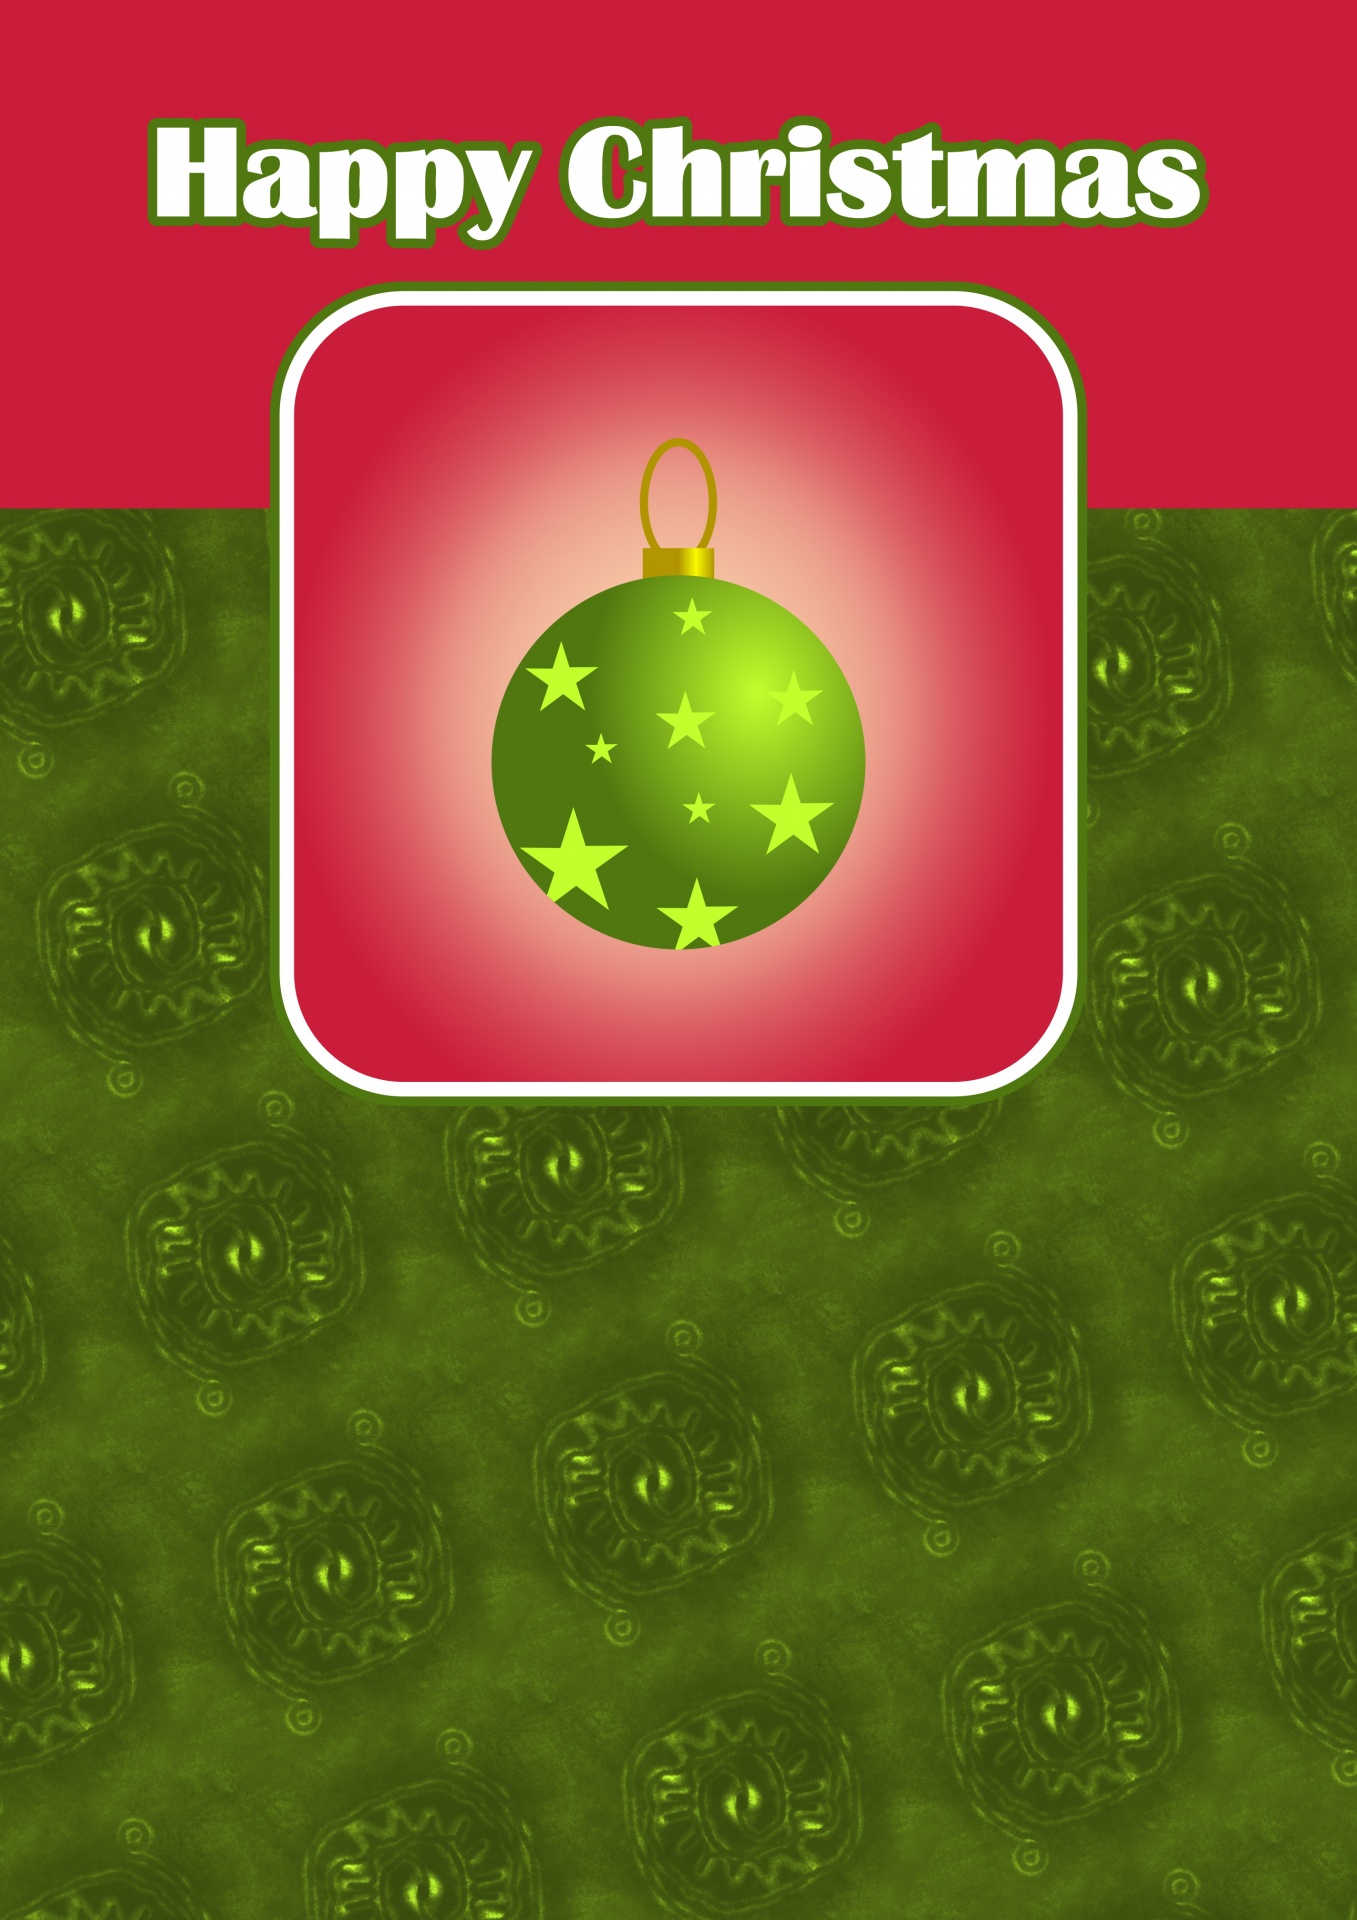 clipart for xmas cards - photo #19